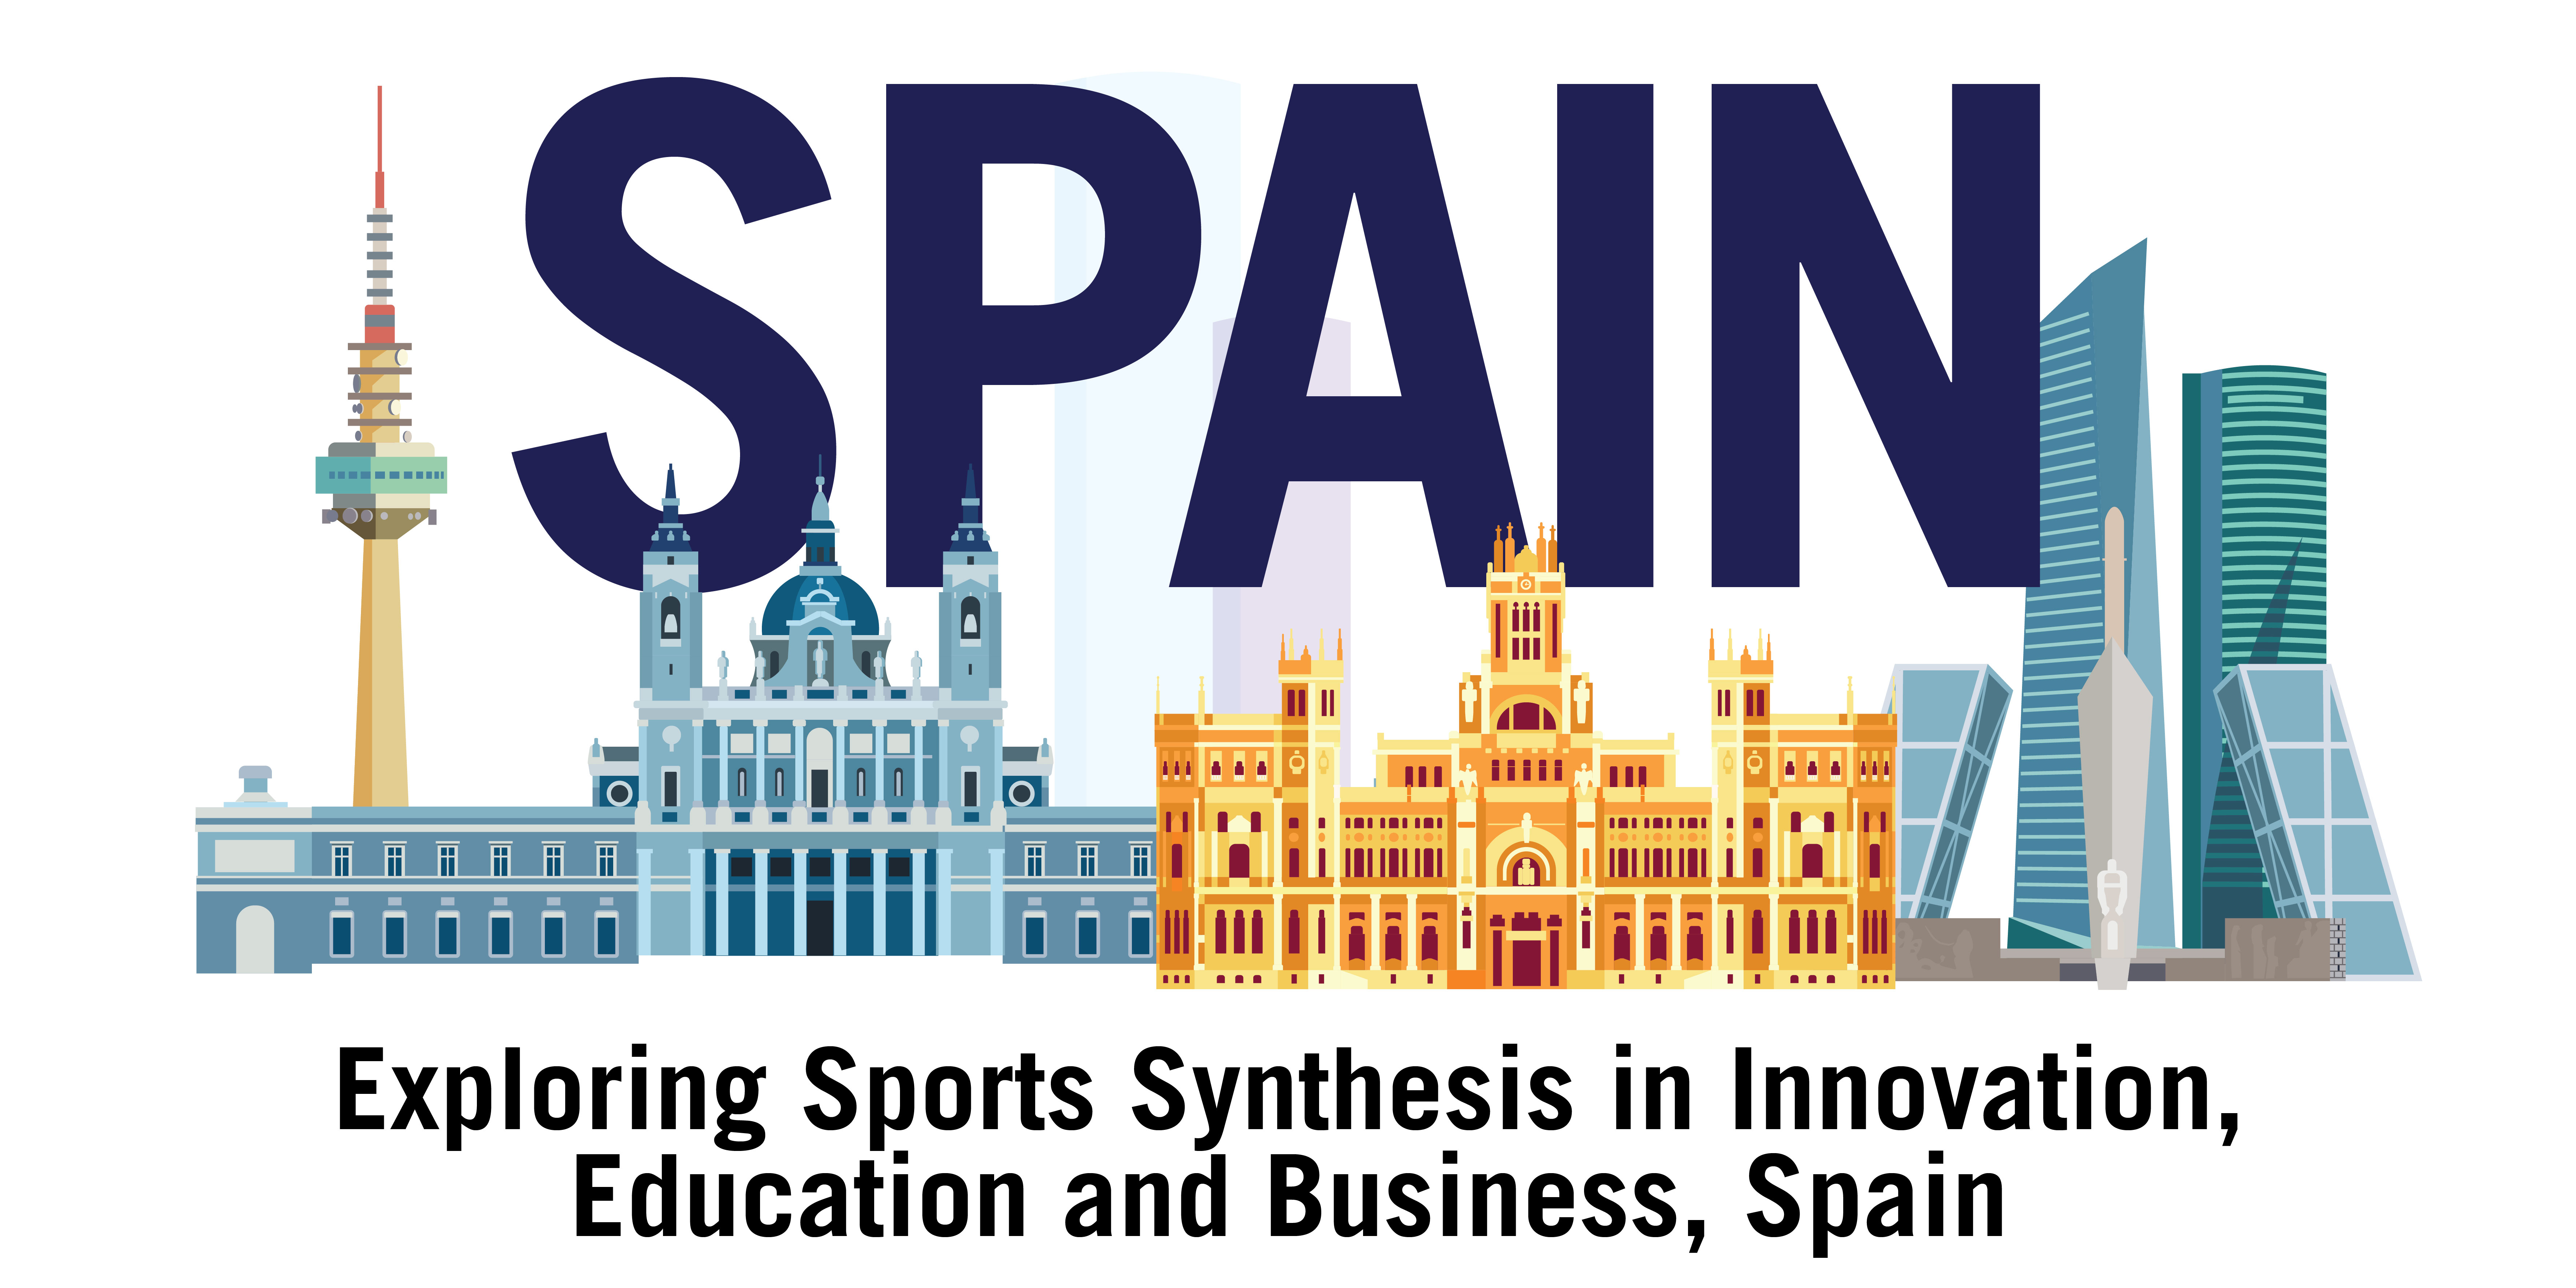 Exploring Sports Synthesis in Innovation, Education and Business, Spain